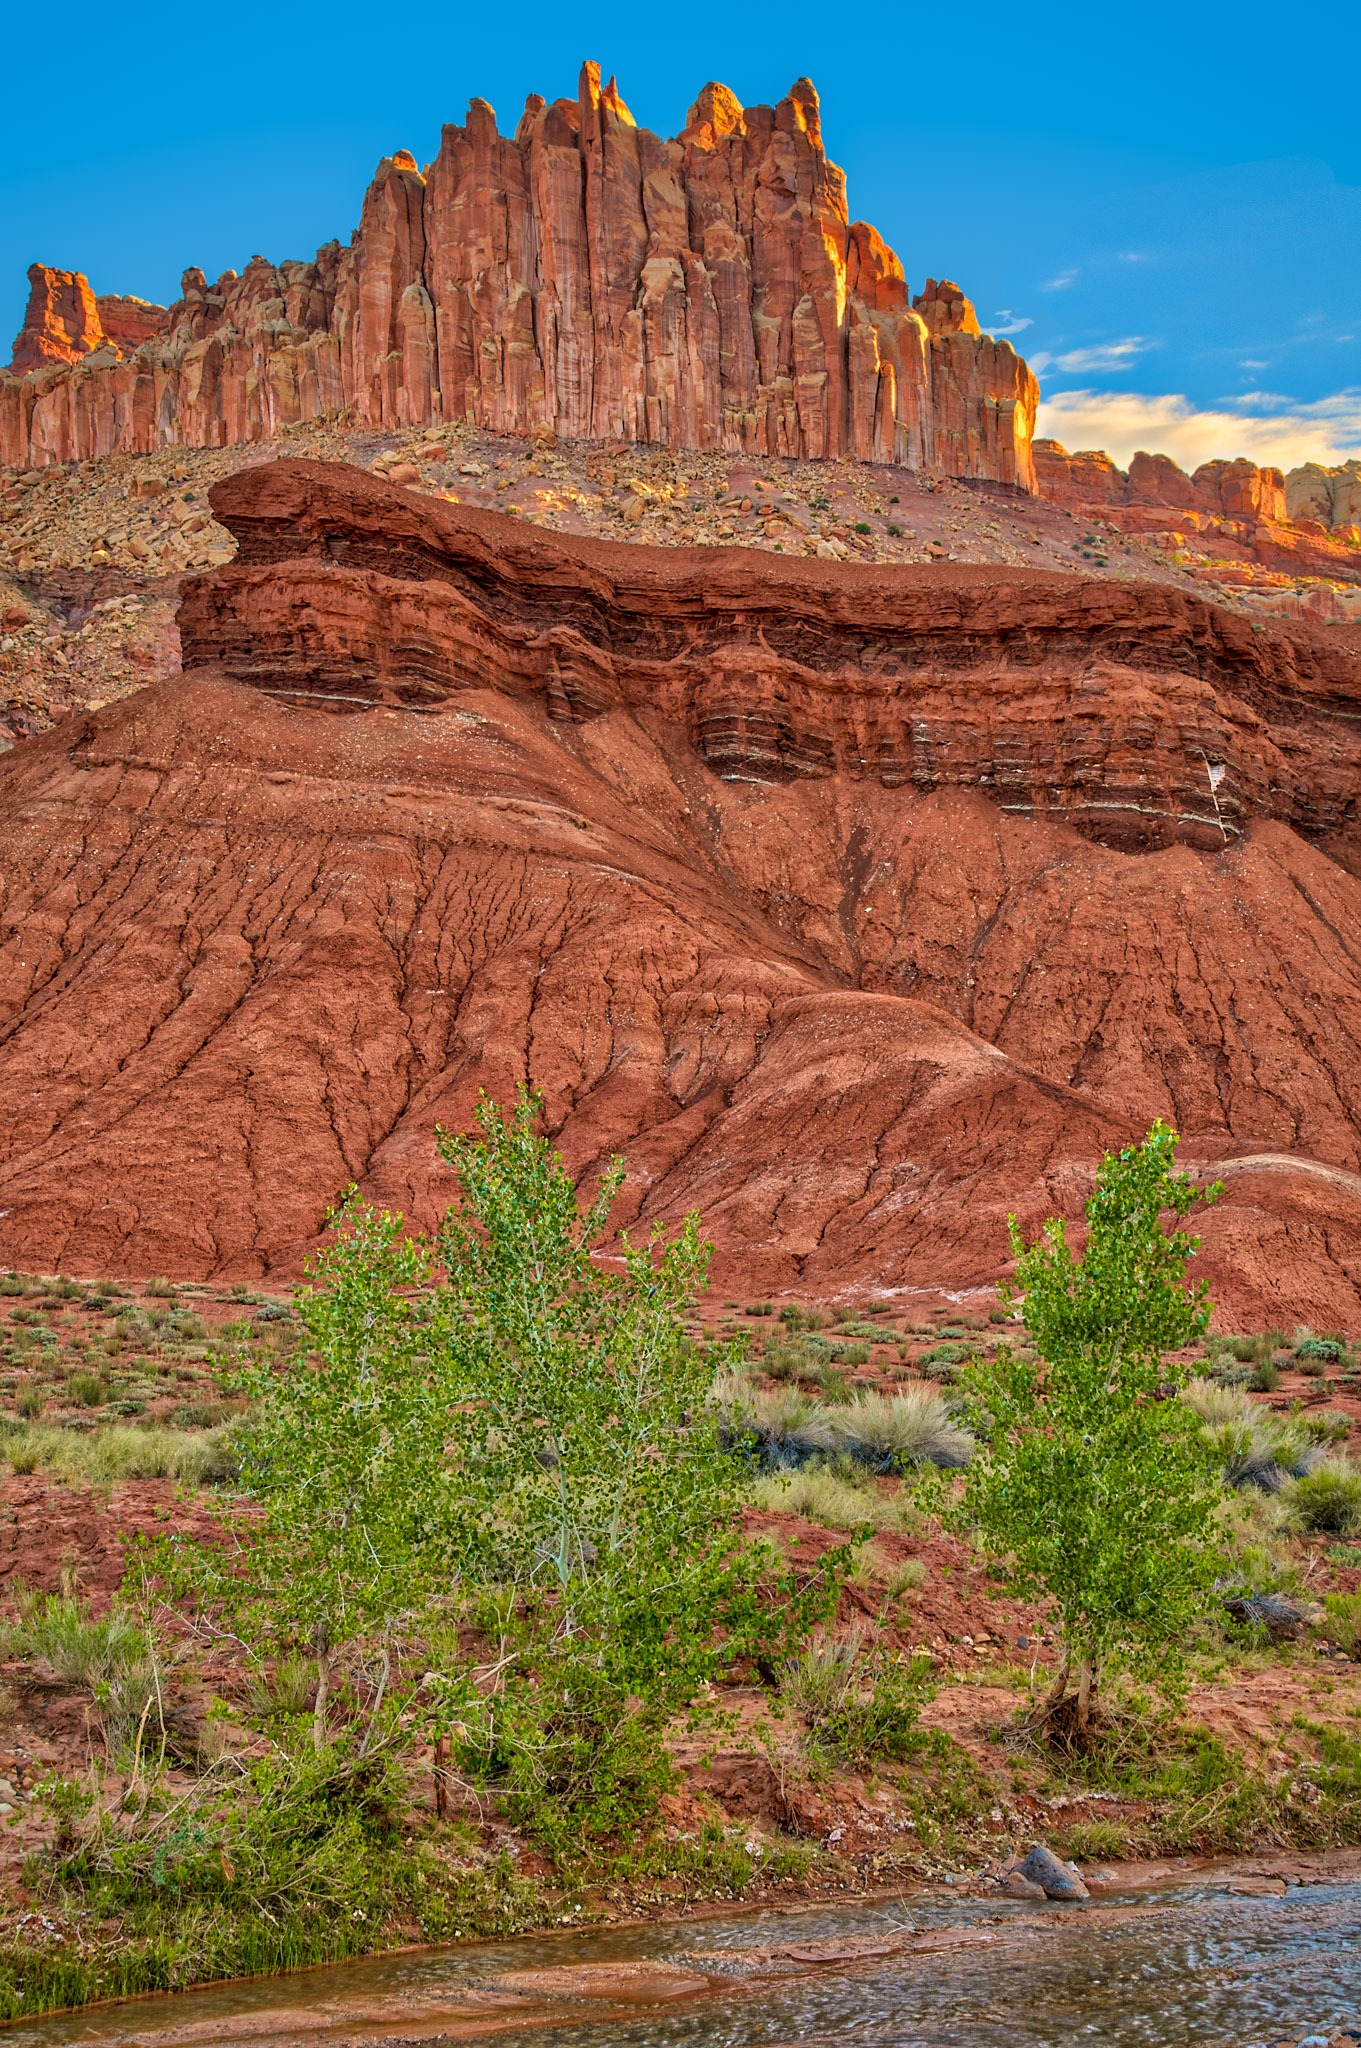 Along Utah Highway 24 near the Capitol Reef National Park Visitor Center, you can see layers of vari-colored rock formations, including the Chinle Formation, in a feature called The Castle.